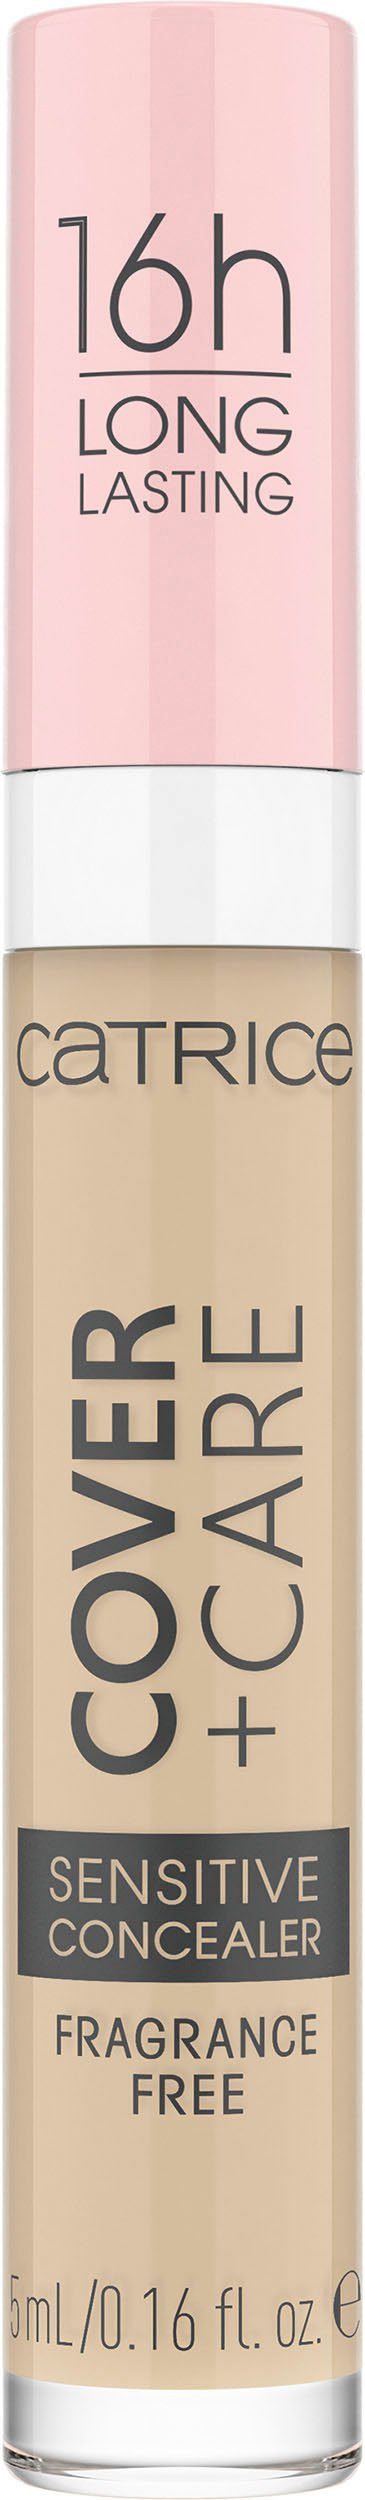 Catrice Concealer Catrice Care Concealer, 3-tlg. nude + Sensitive 002N Cover